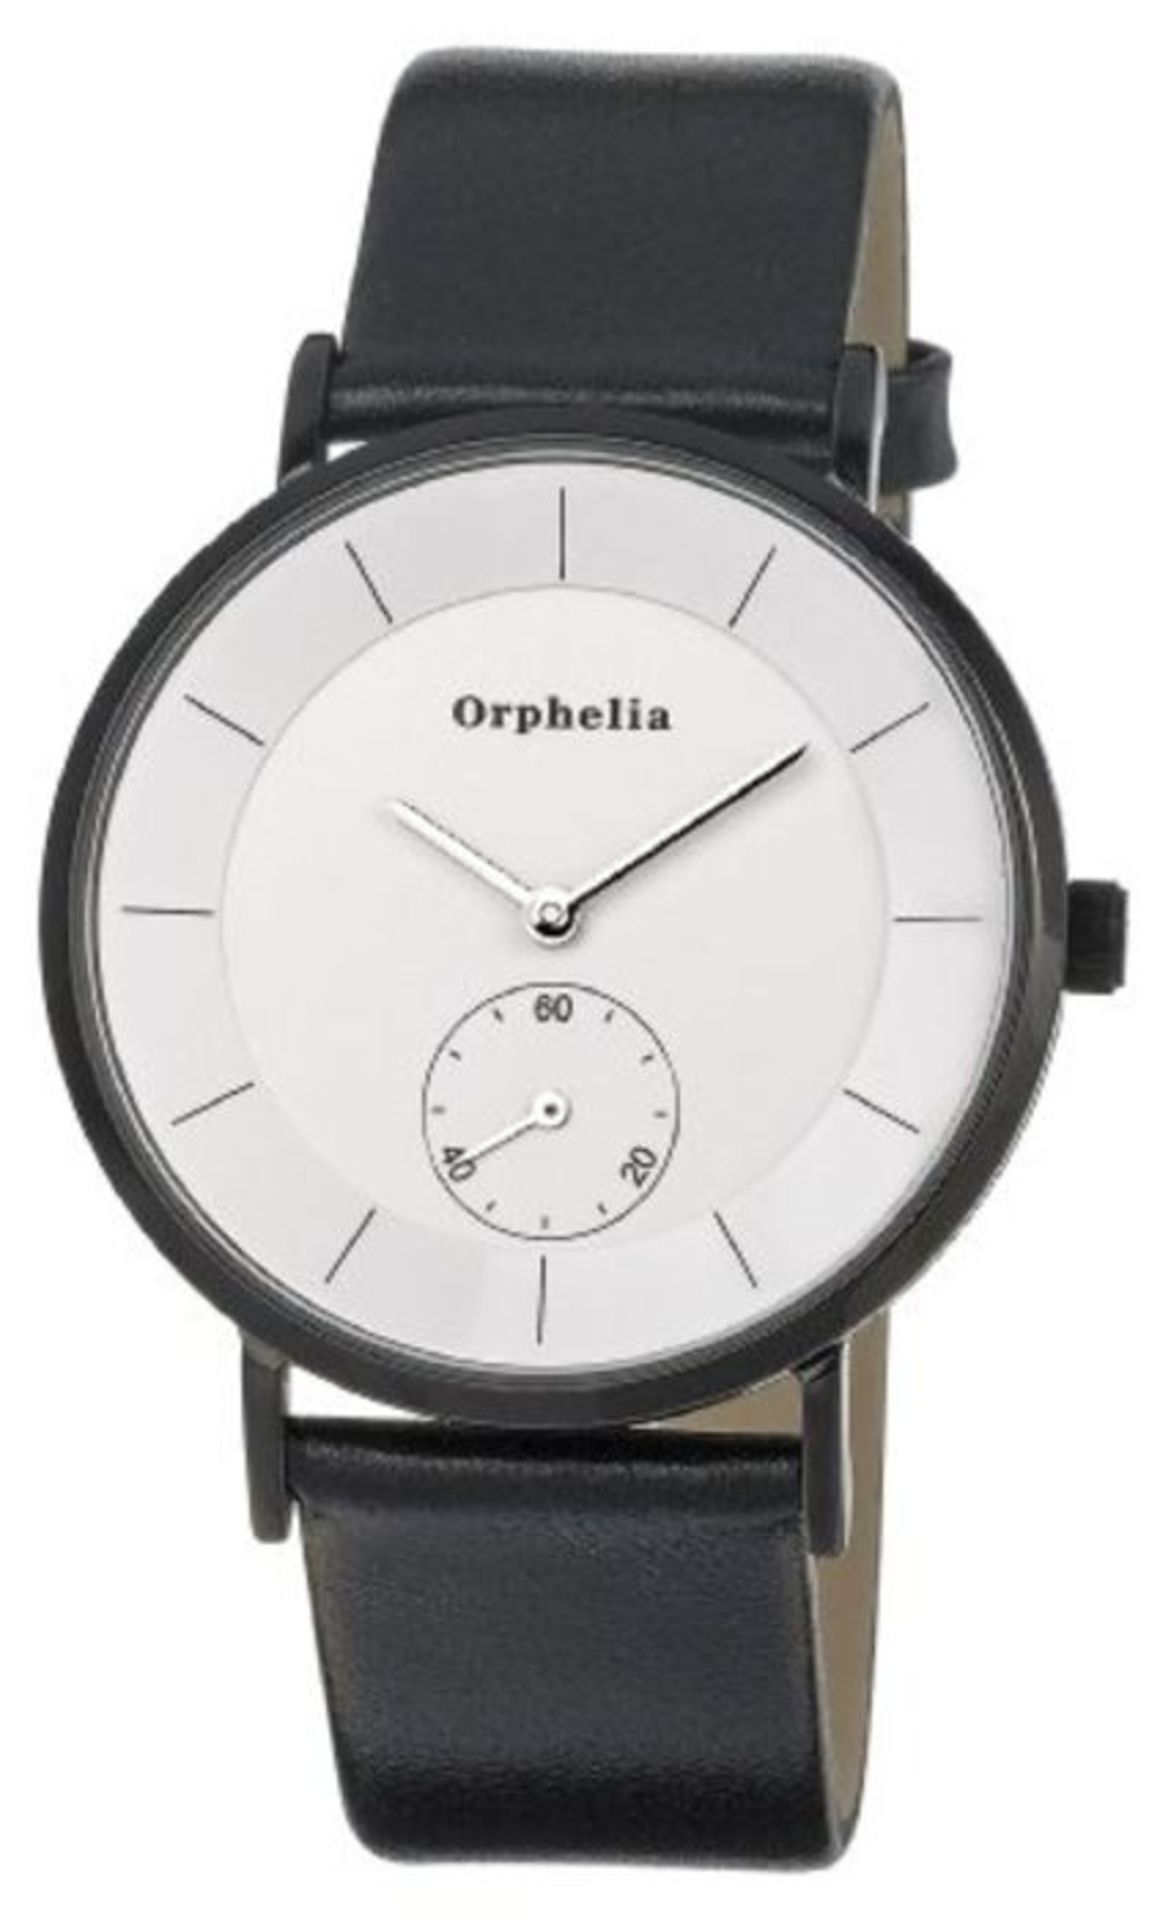 Orphelia Women's Quartz Watch with White Dial and Black Leather Strap - Image 4 of 6